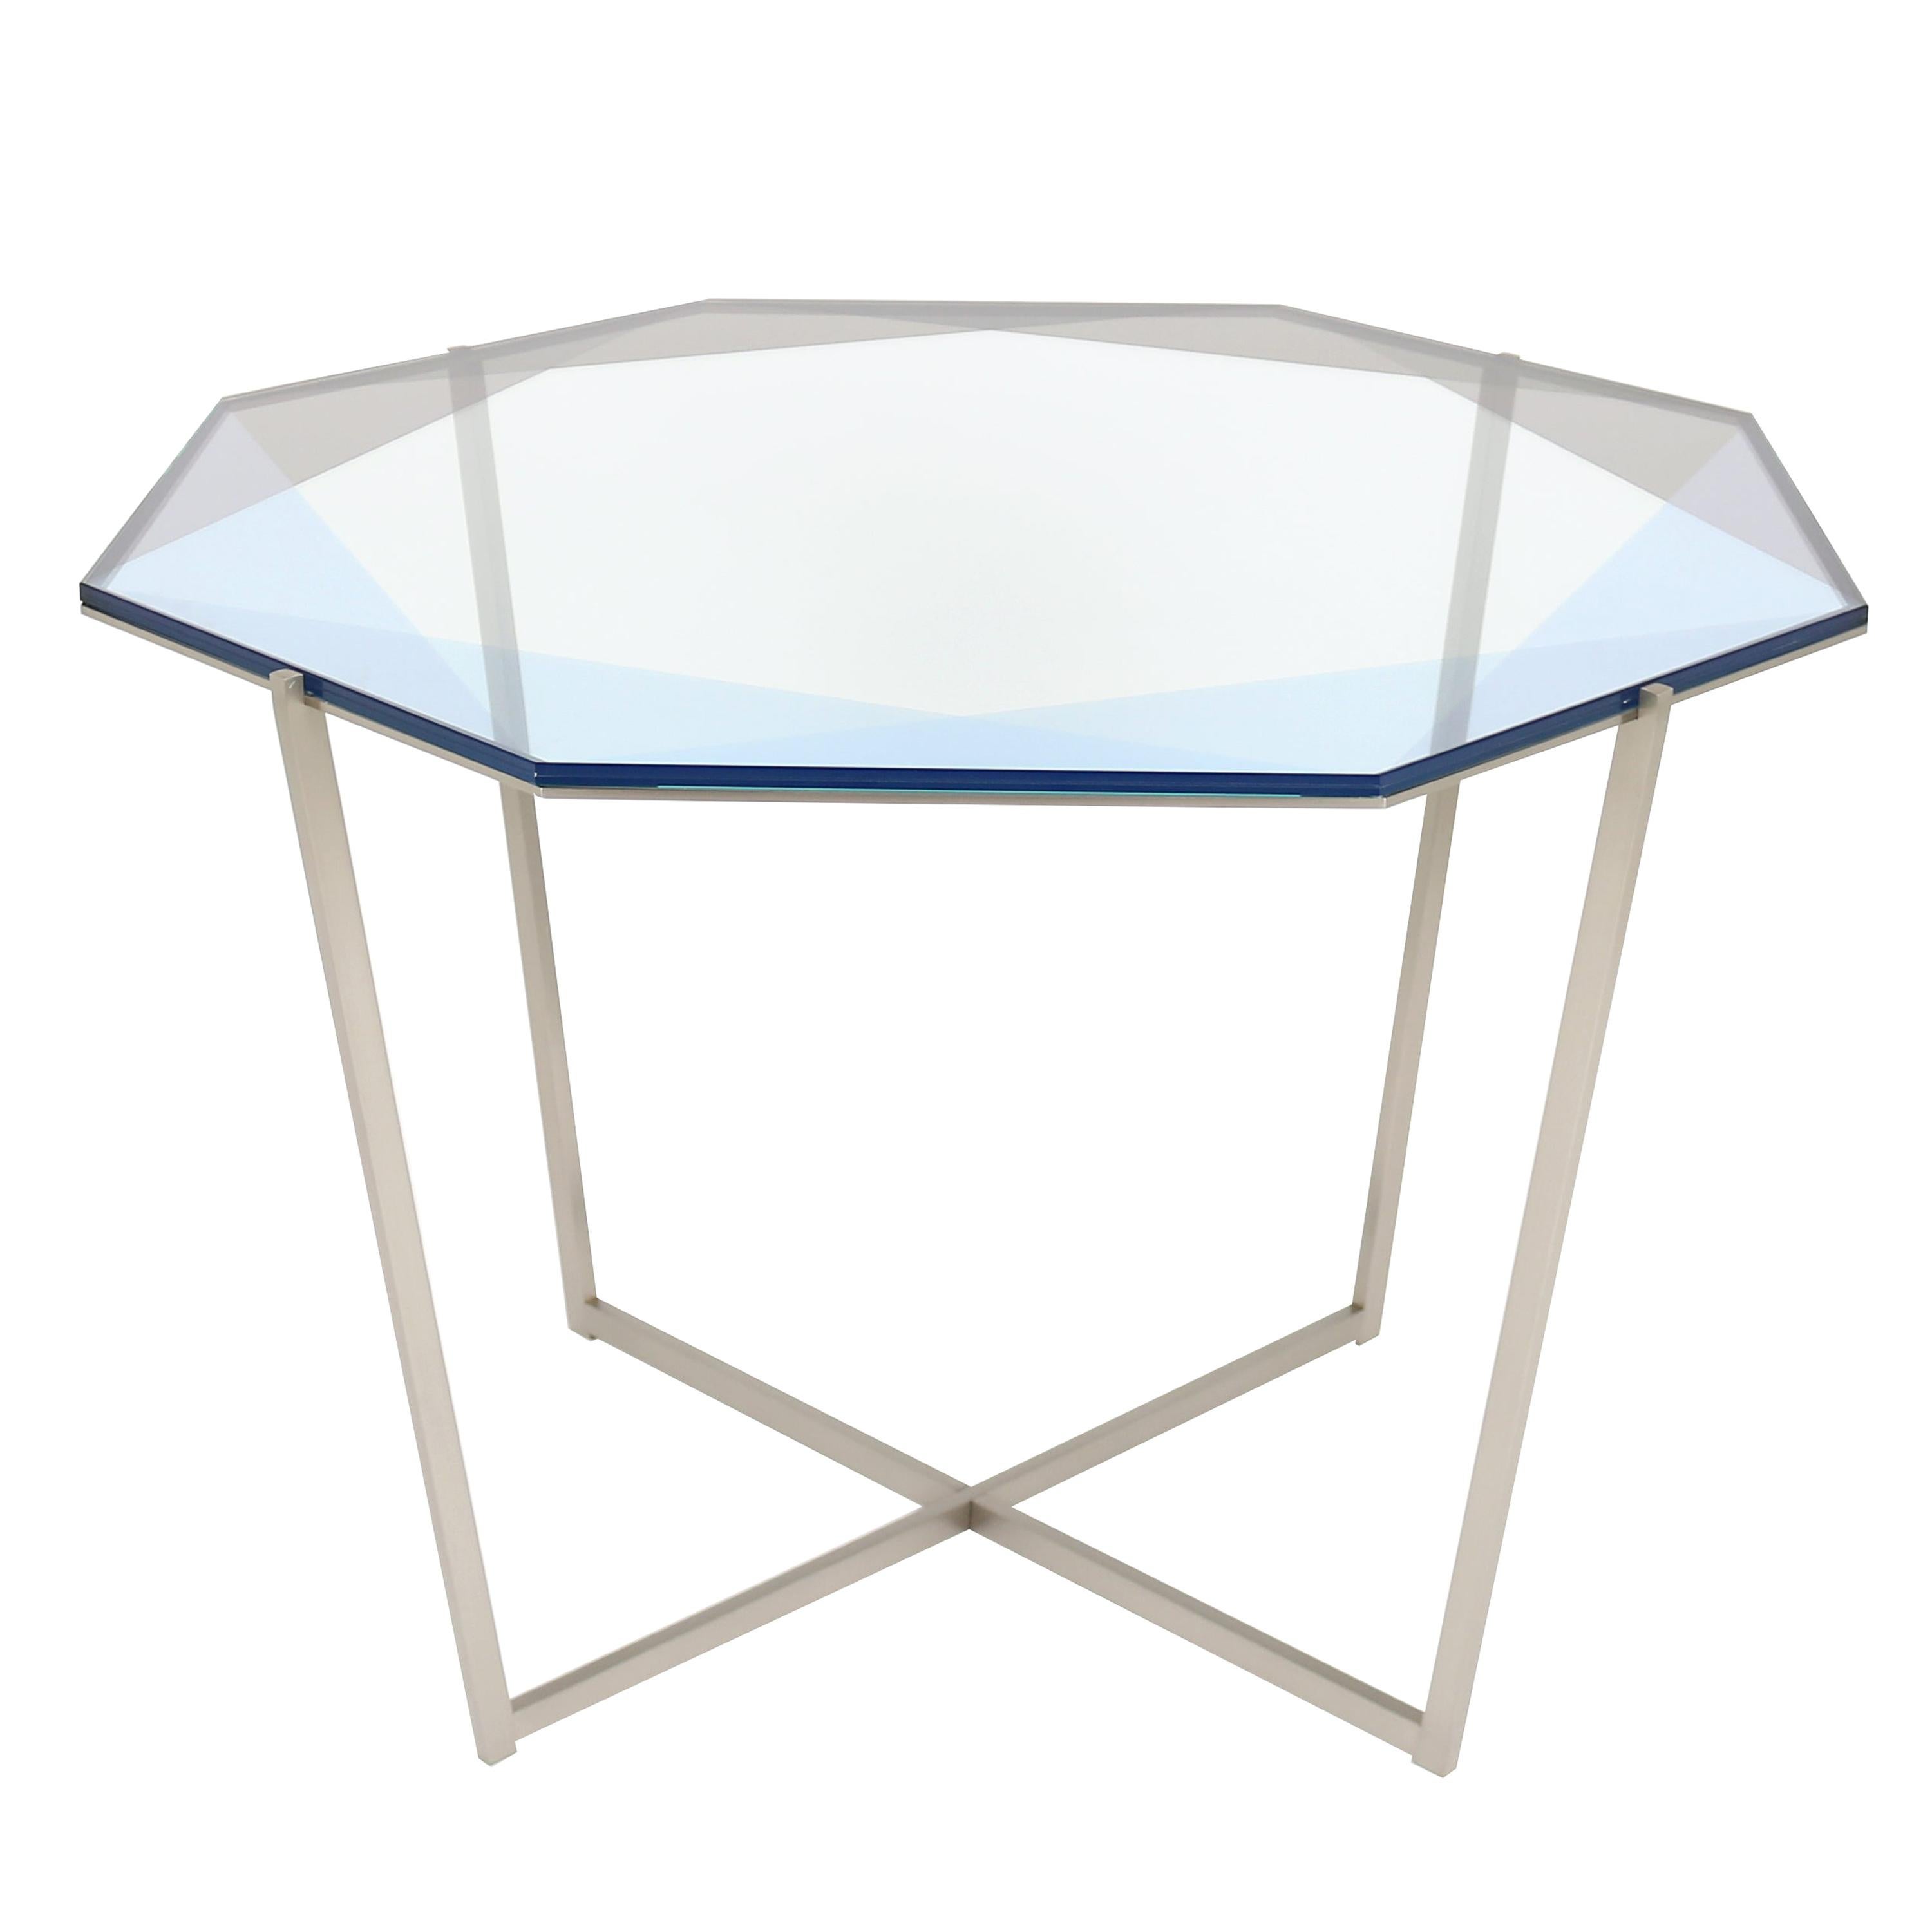 Gem Octagonal Dining Table/Entry Table-Blue Glass with Steel Base by Debra Folz For Sale